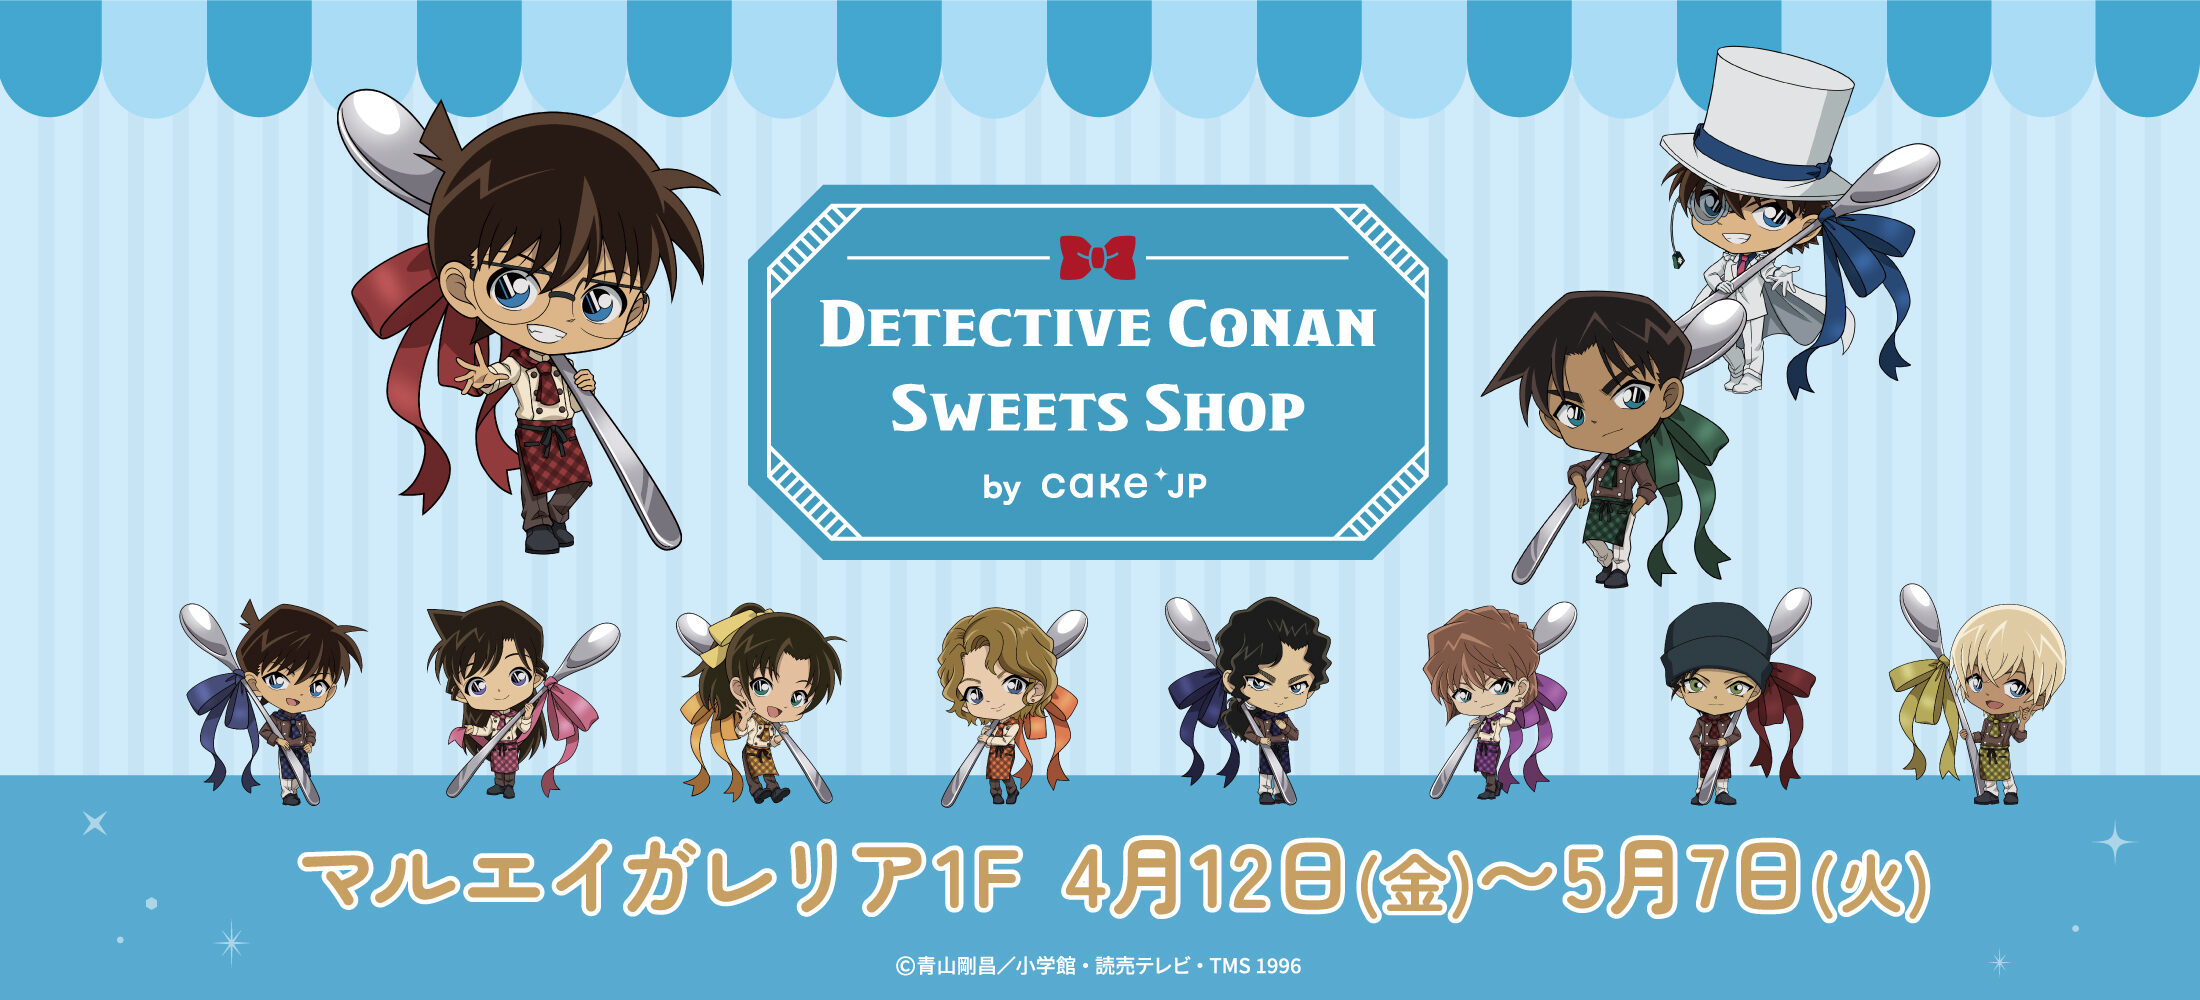 Detective Conan Sweets Shop by Cake.jp